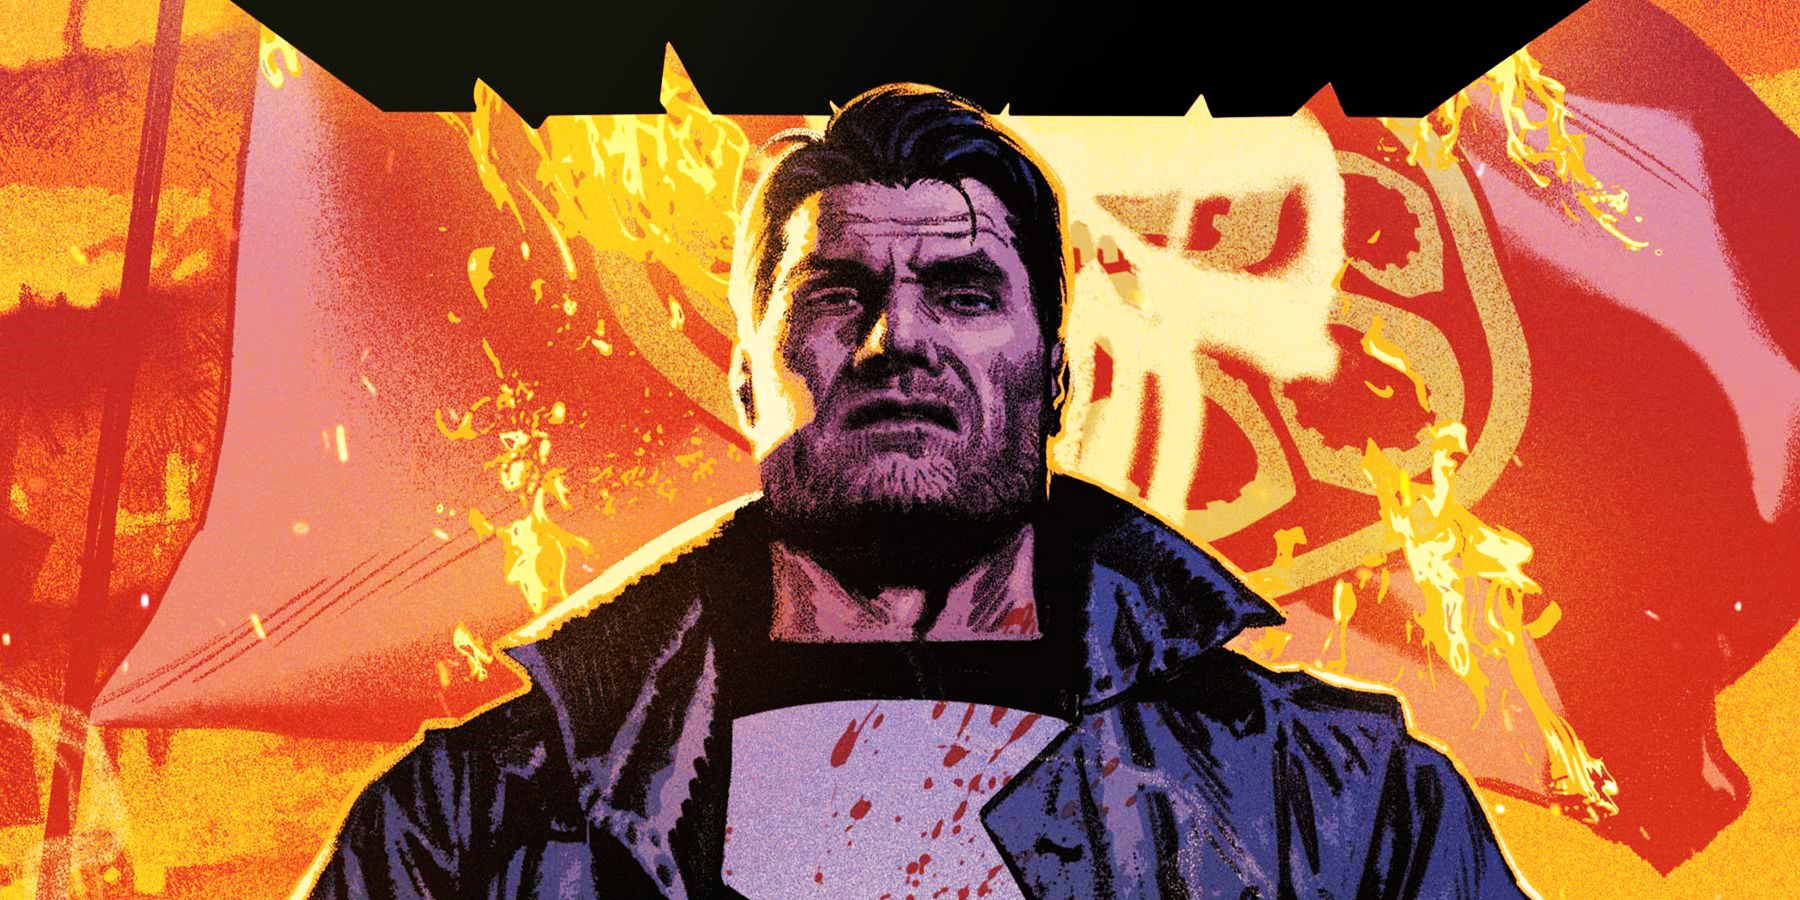 Max Payne 3 once had a co-op prologue story for two players